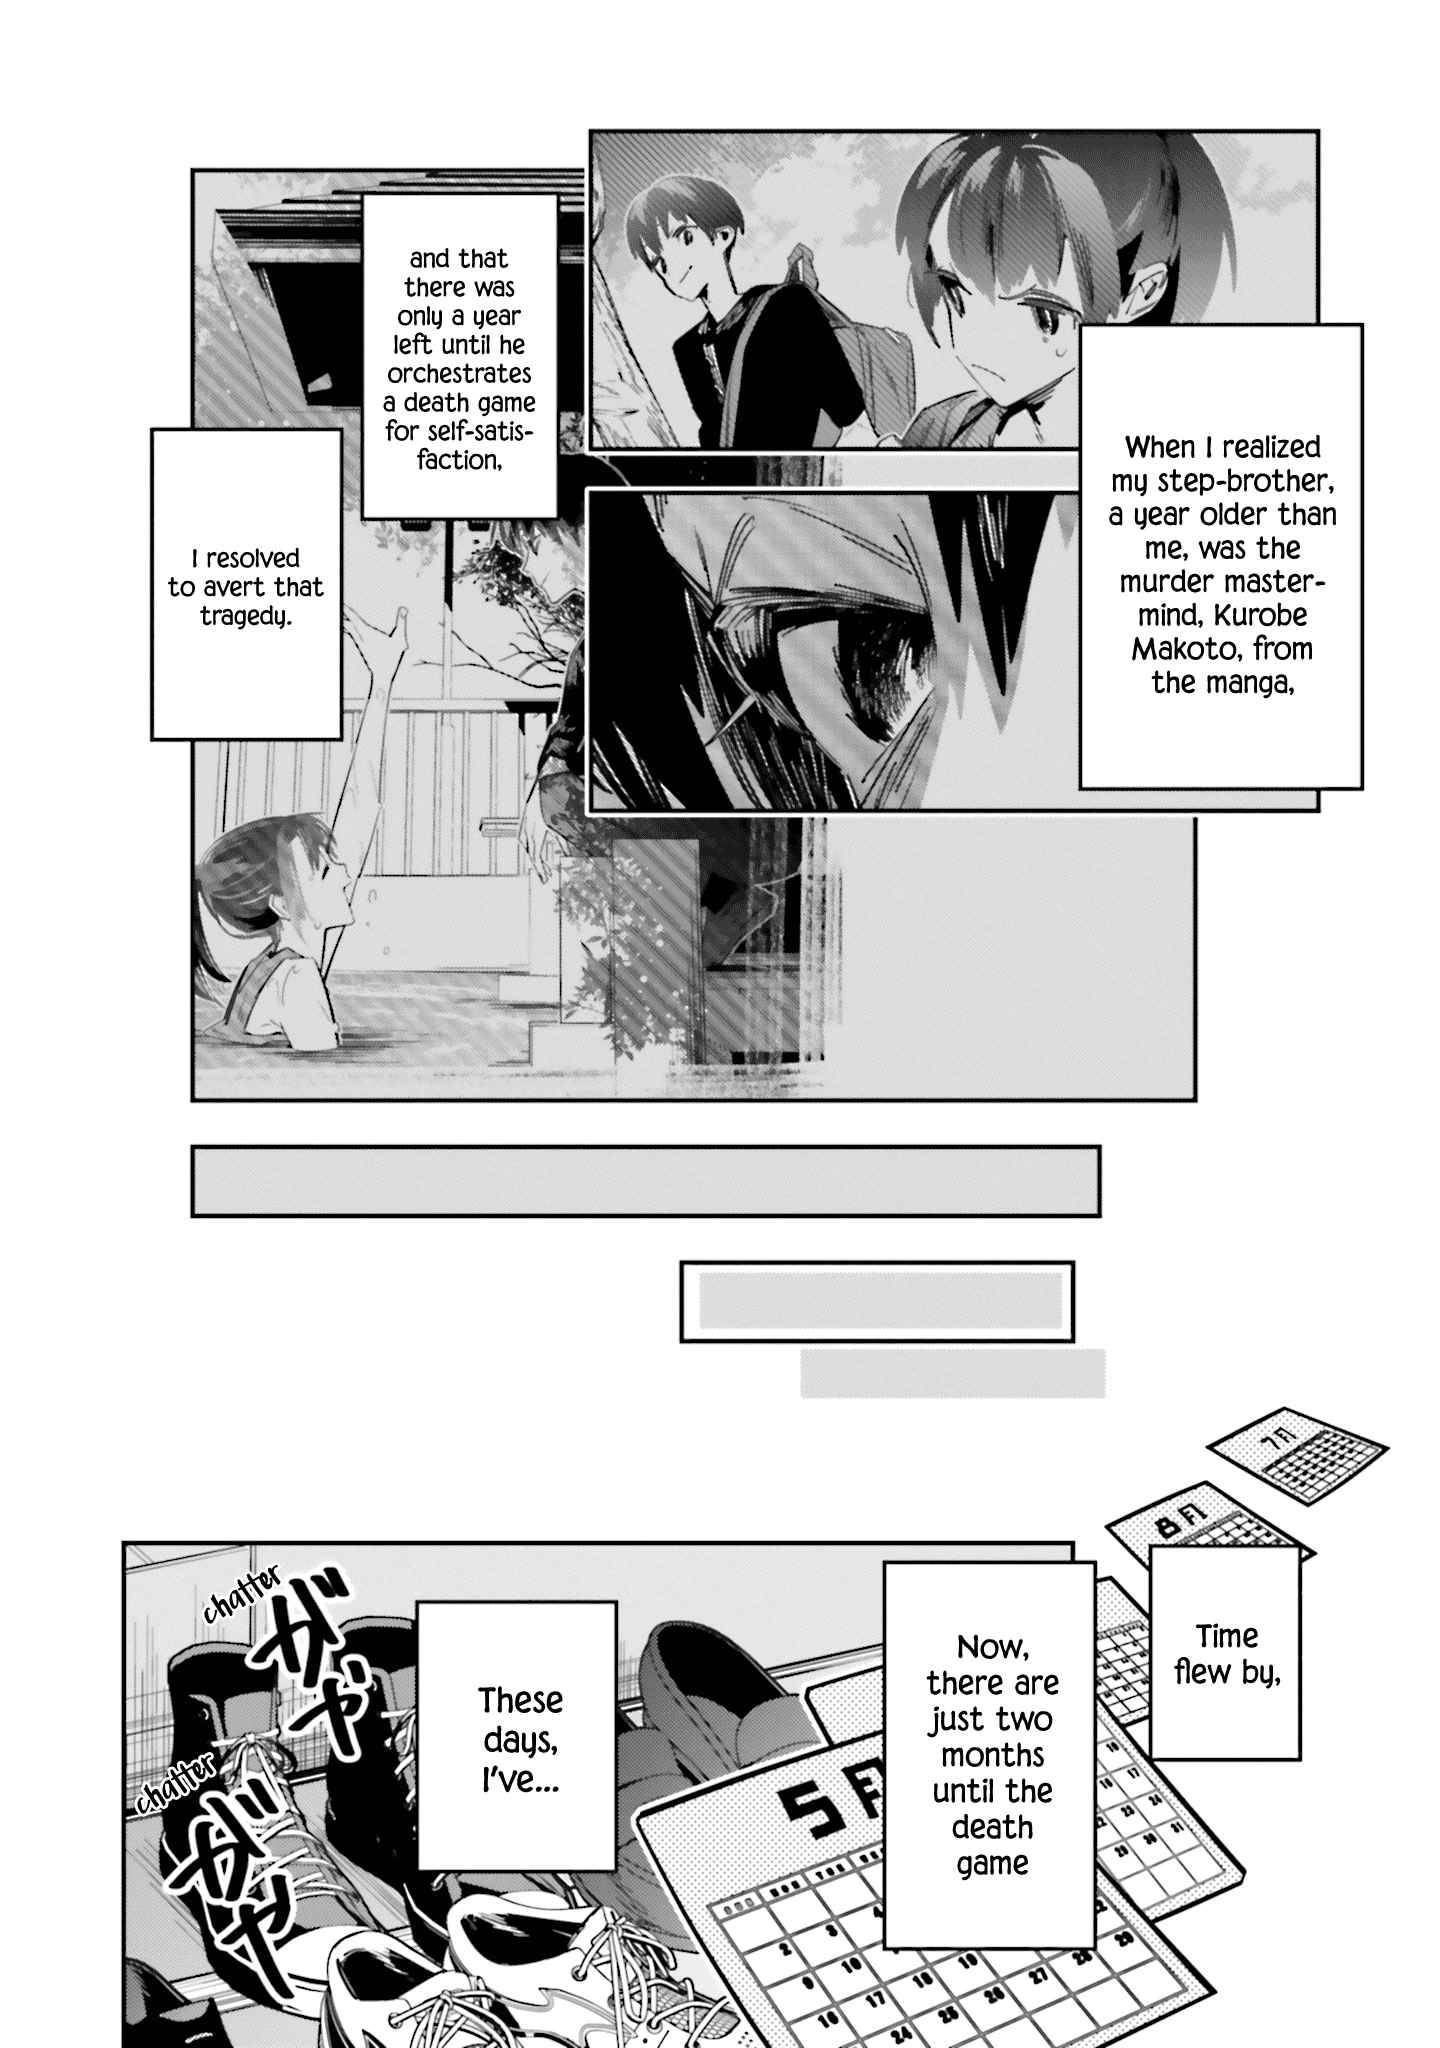 I Reincarnated As The Little Sister Of A Death Game Manga’S Murd3R Mastermind And Failed - chapter 10 - #6